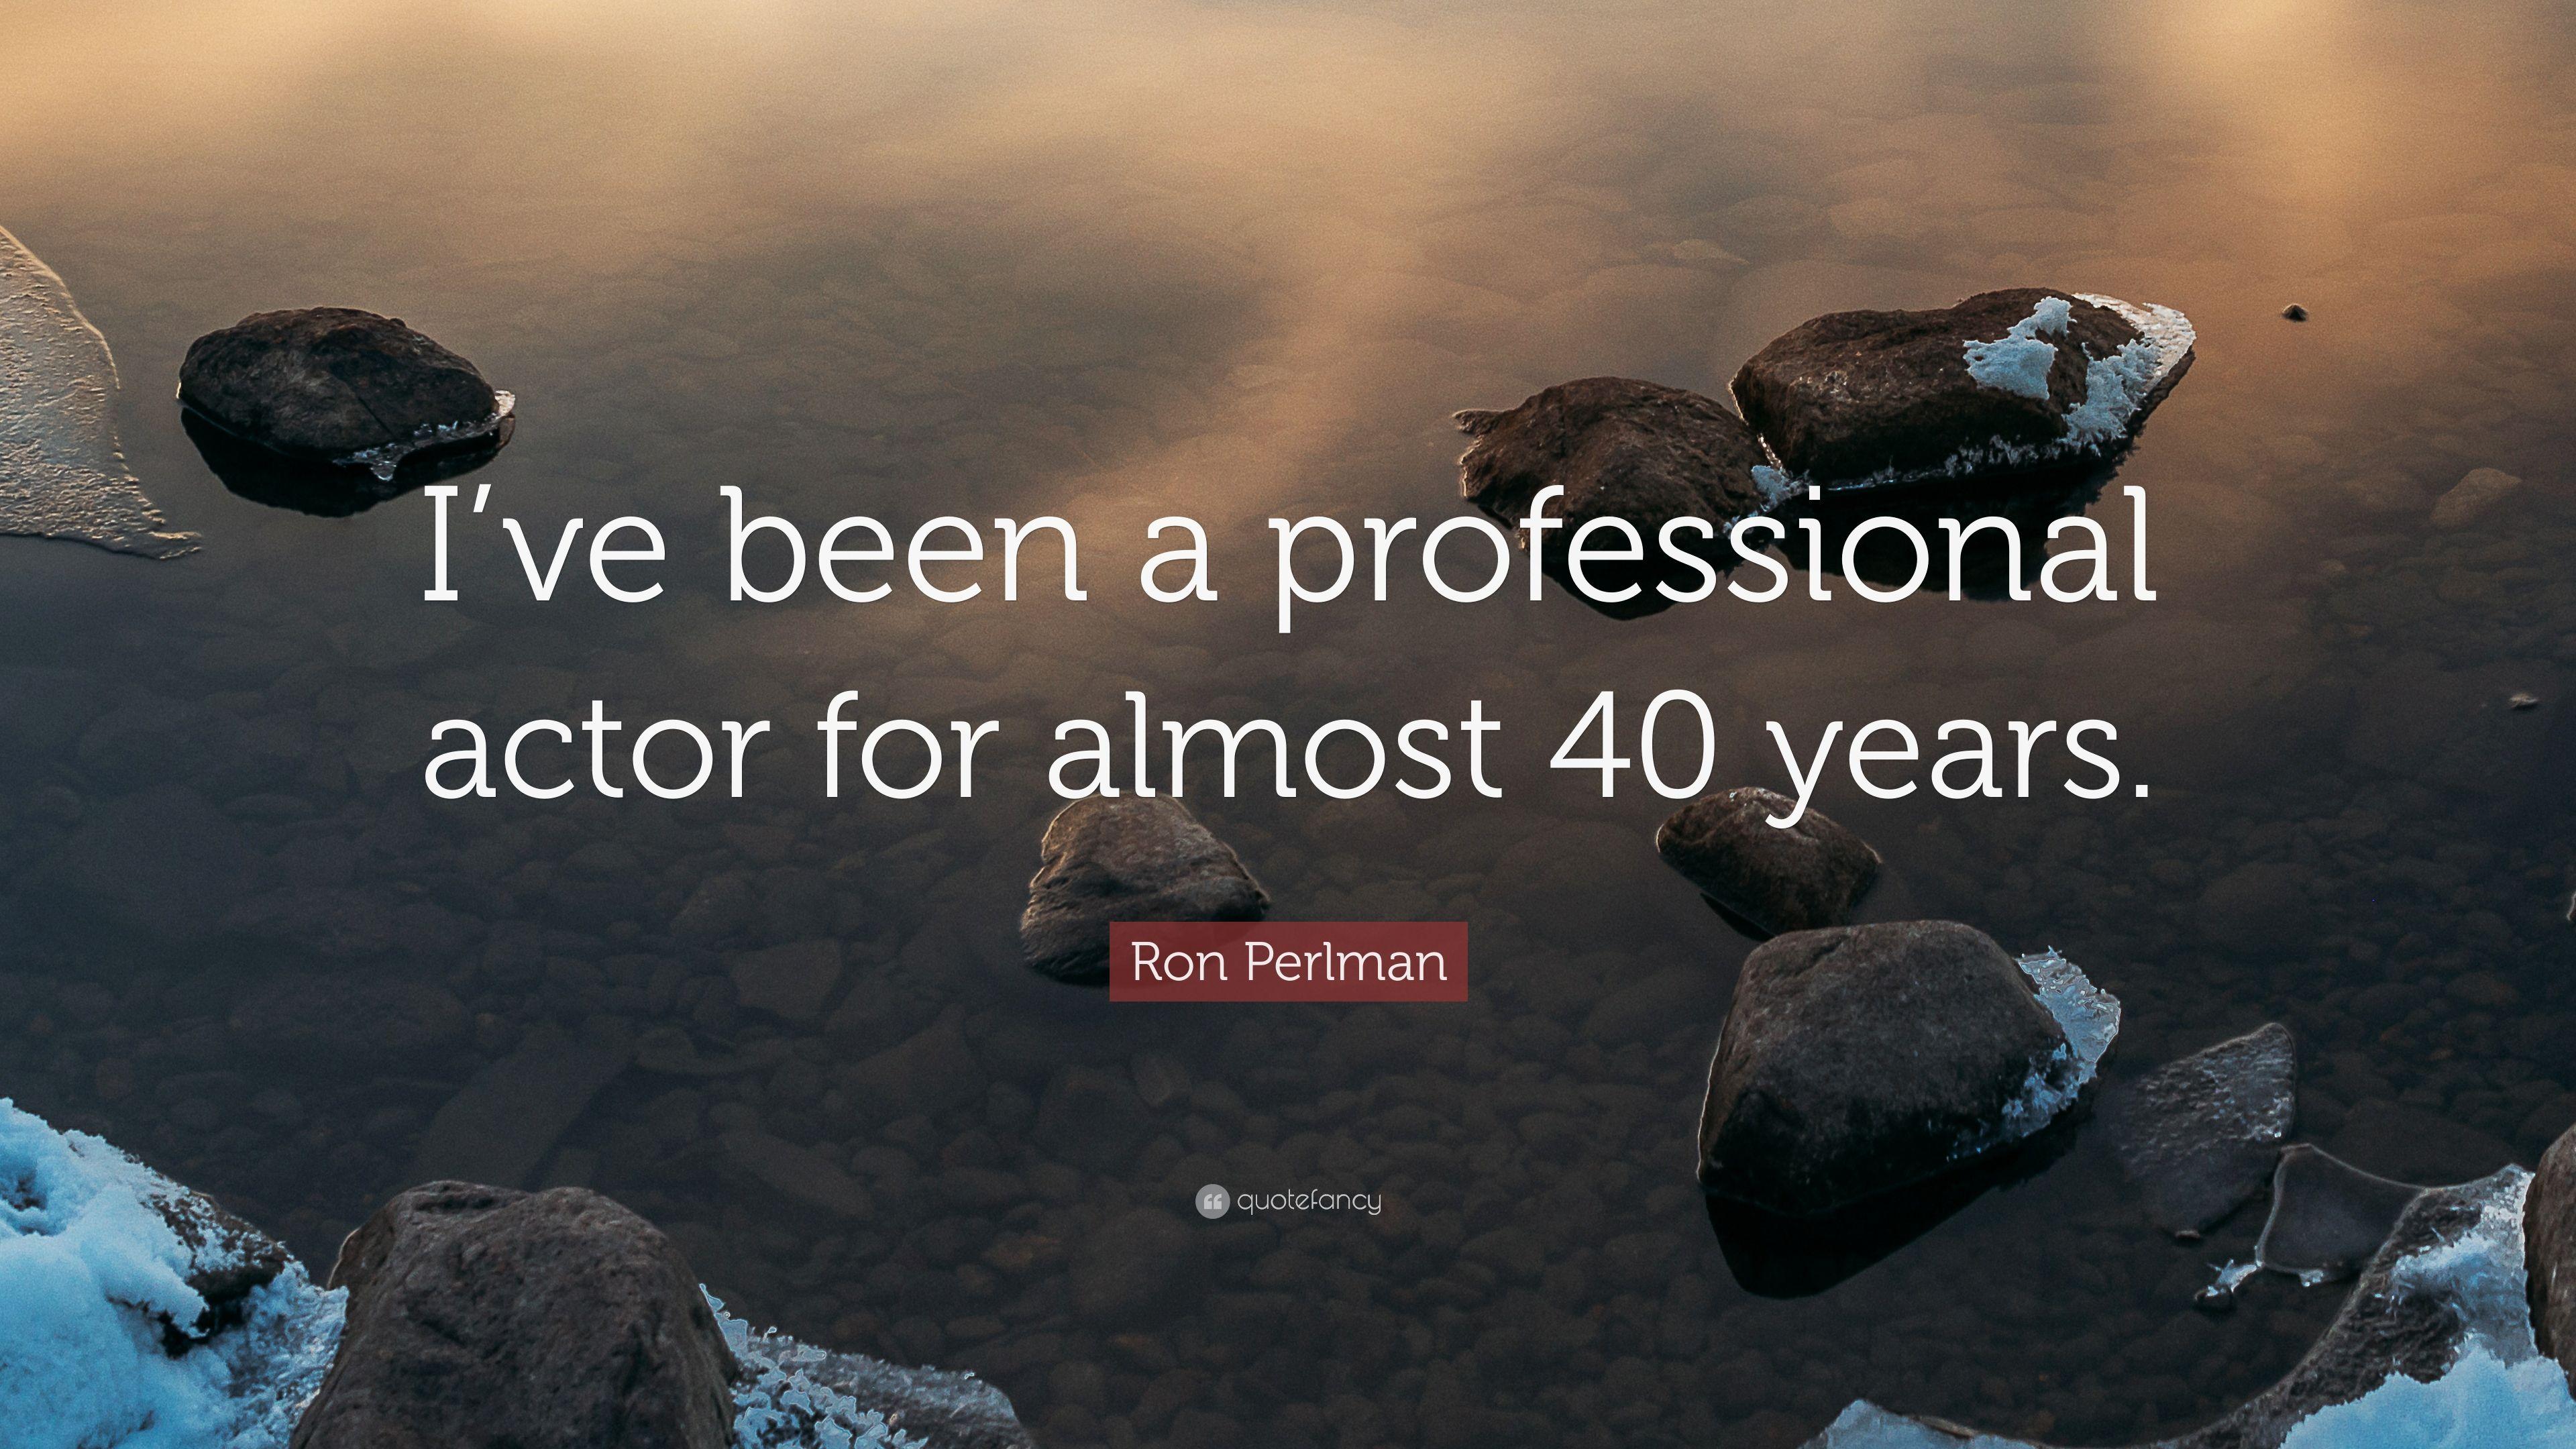 Ron Perlman Quote: “I've been a professional actor for almost 40